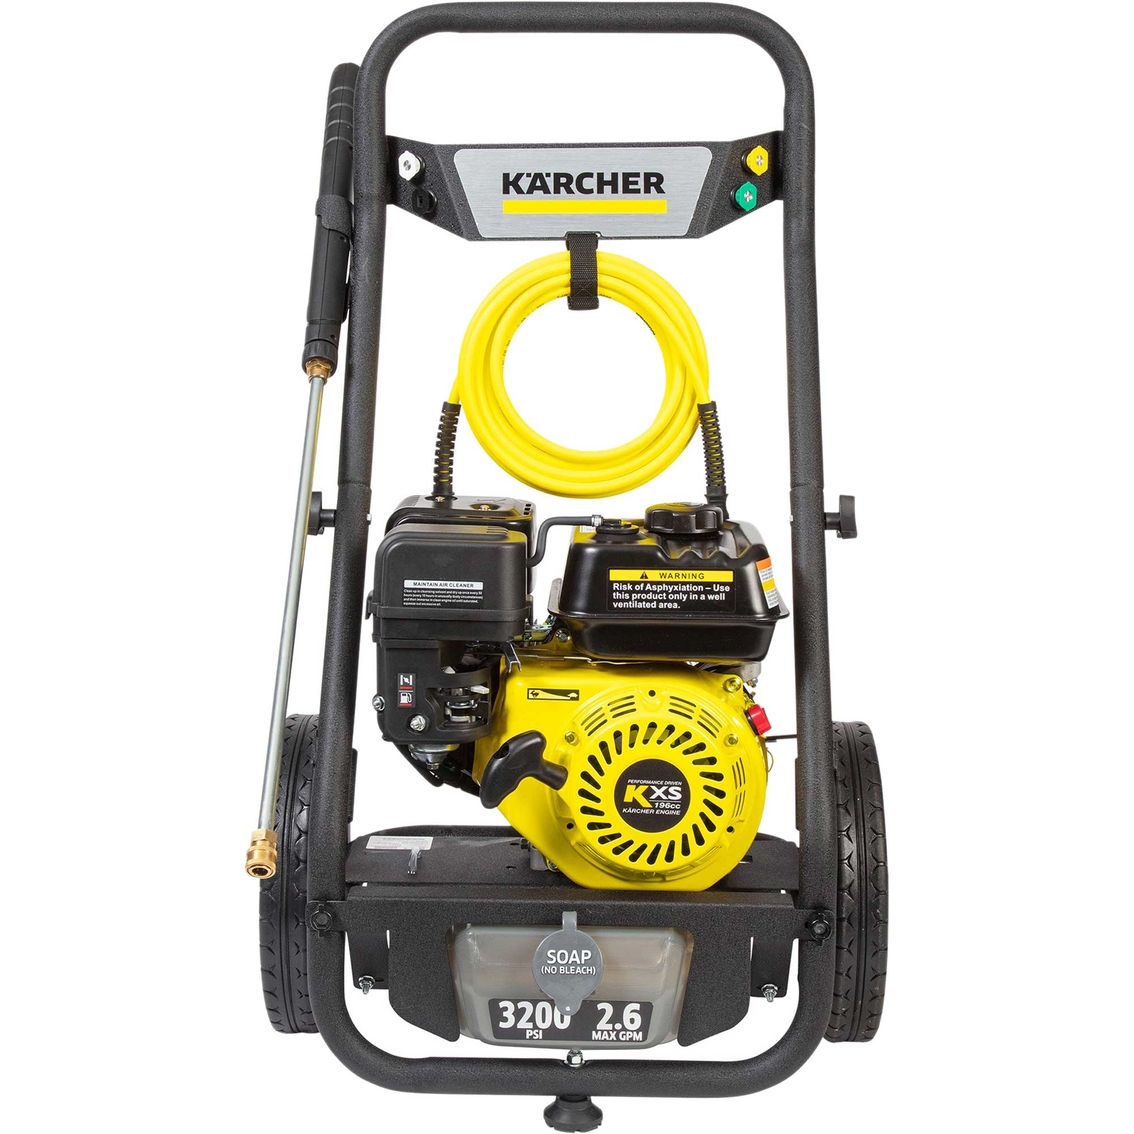 Karcher G 3200 Q 3200 PSI 2.6 GPM Axial Pump Gas Pressure Washer with 4 Nozzles - Image 3 of 7